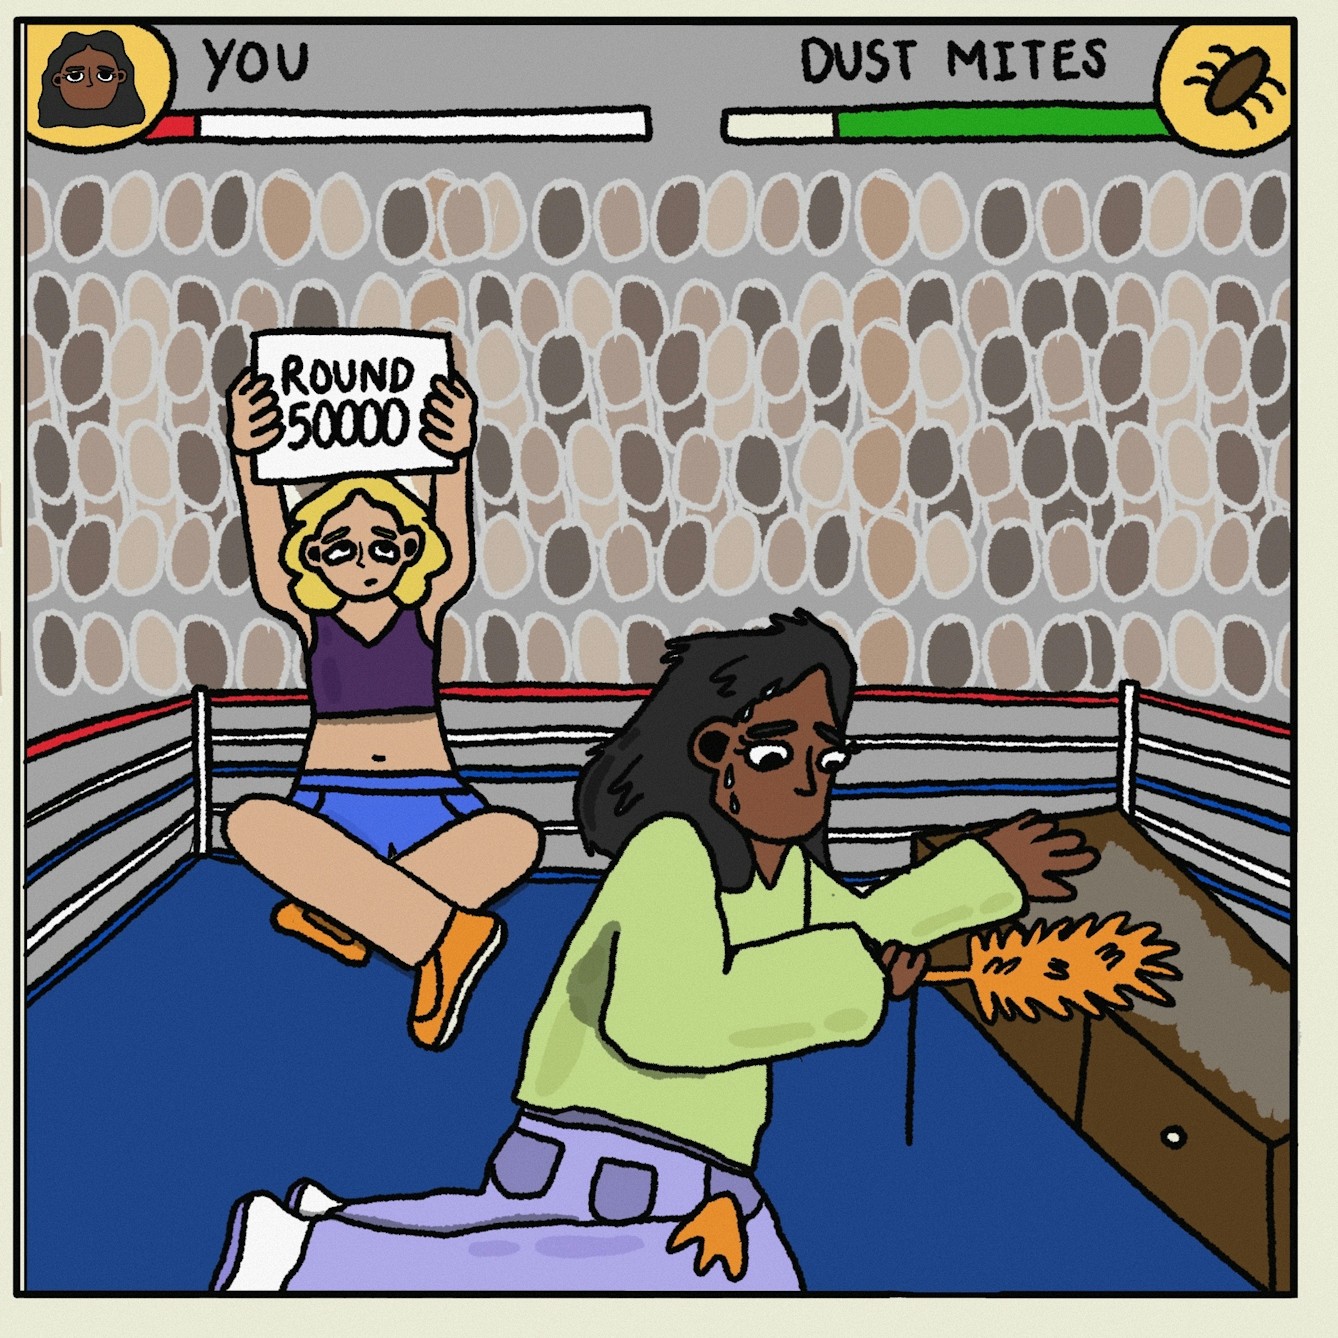 Panel 4 of a digitally drawn, four-panel comic titled ‘Last man standing’. It’s round 50,000 and the dust mites are clearly winning. With barely any energy left, your character looks defeated in their battle against the dust. 